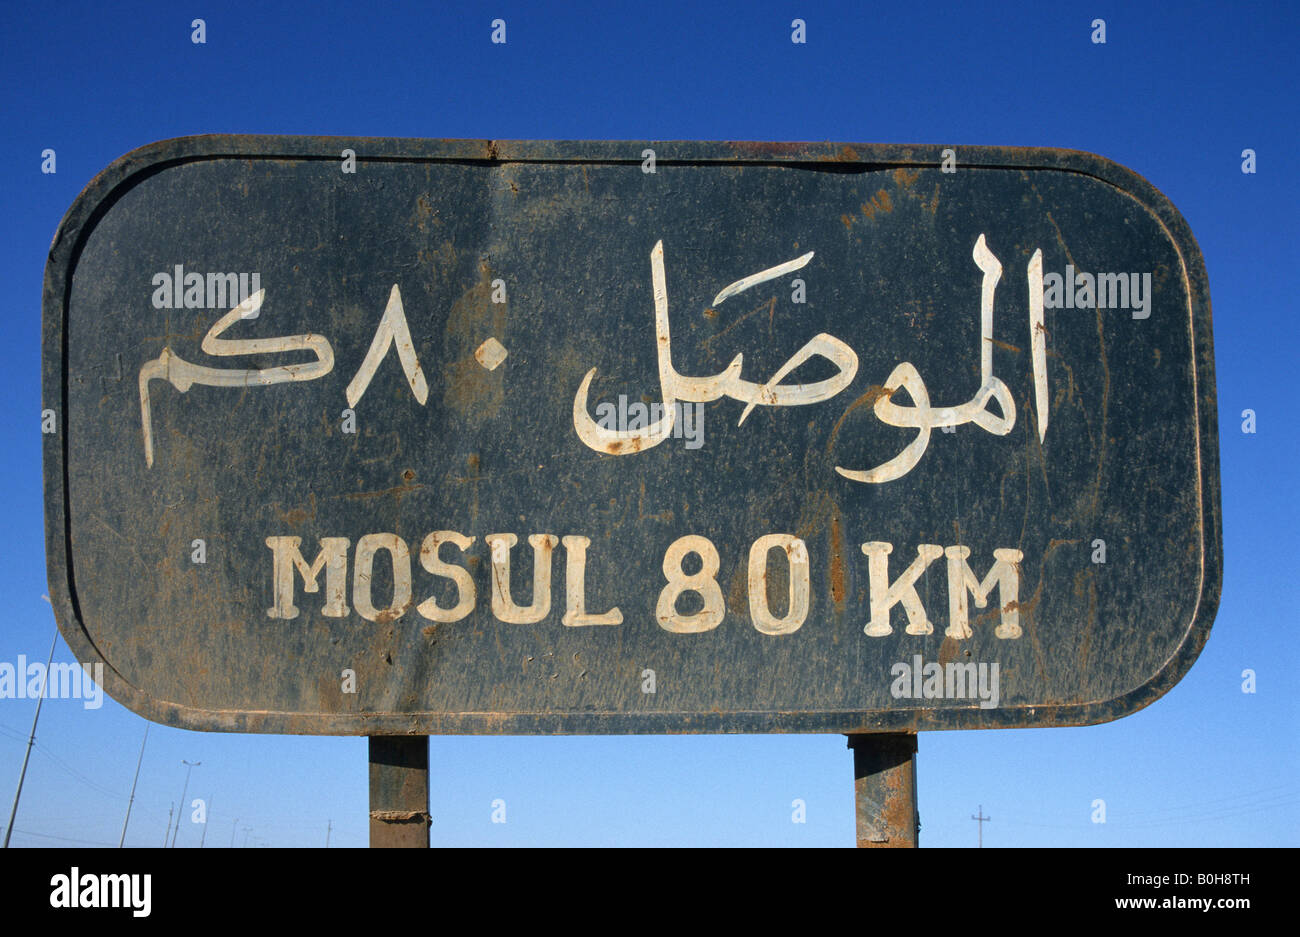 Road sign, 'Mosul 80 km' on a country road near Hatra, Iraq, Middle East Stock Photo